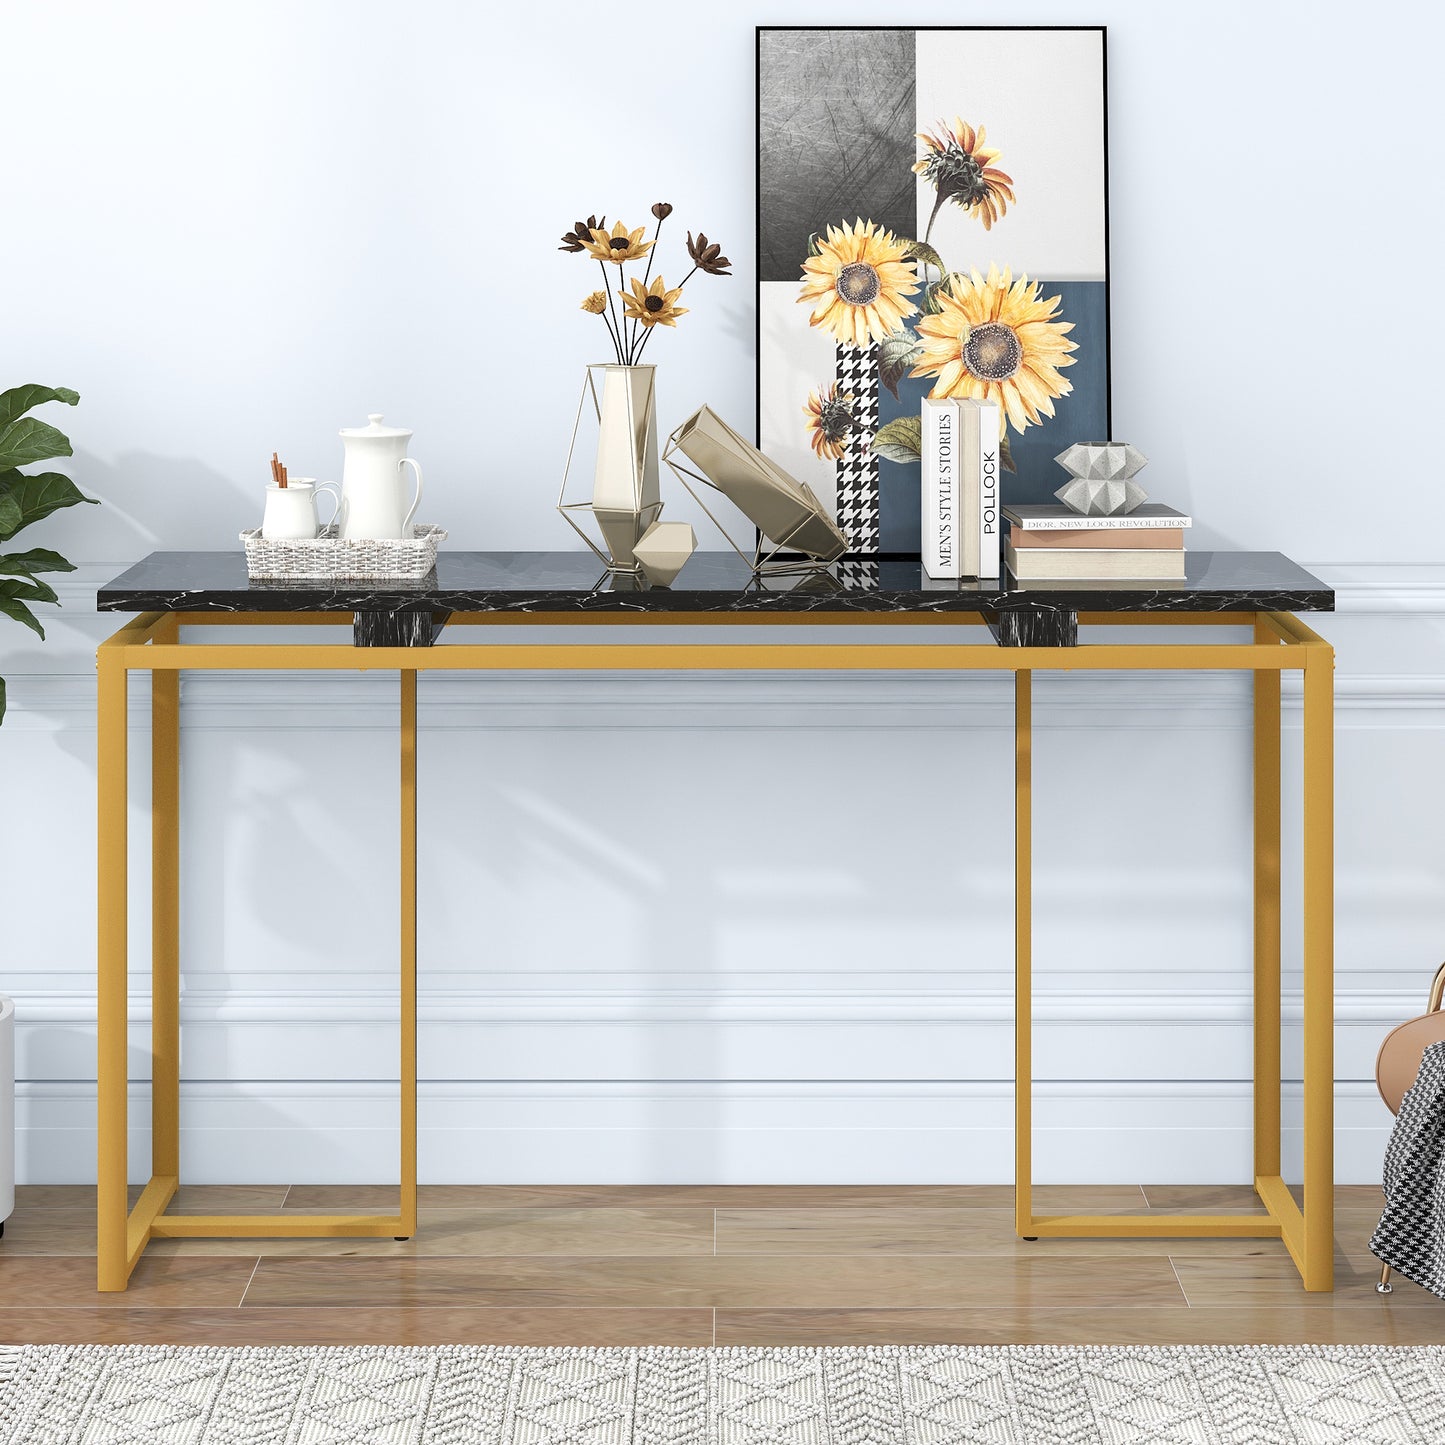 Narrow Long Entryway Table, HSUNNS 63in Faux Marble Console Table with Metal Frame, Long Sofa Table for Living Room Bedroom, Modern Living Room Furniture, Size: 35.7" H x 63" W x 15" D